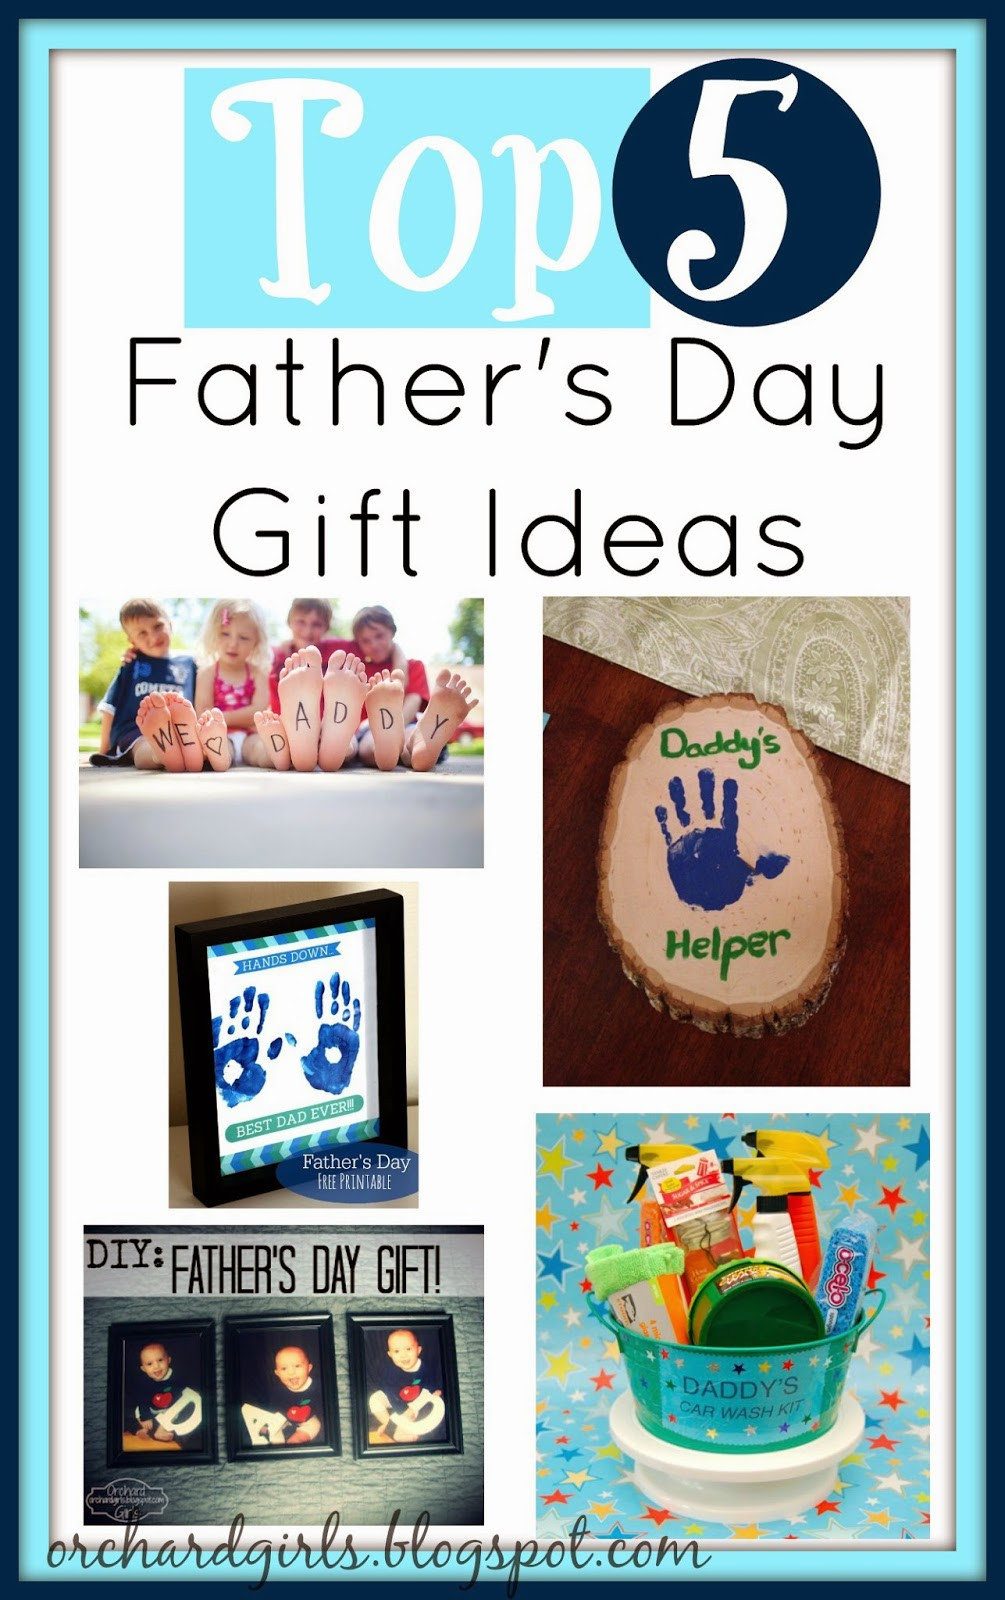 Fathers Day Ideas From Kids
 Orchard Girls Top 5 Father s Day Gift Ideas from Kids